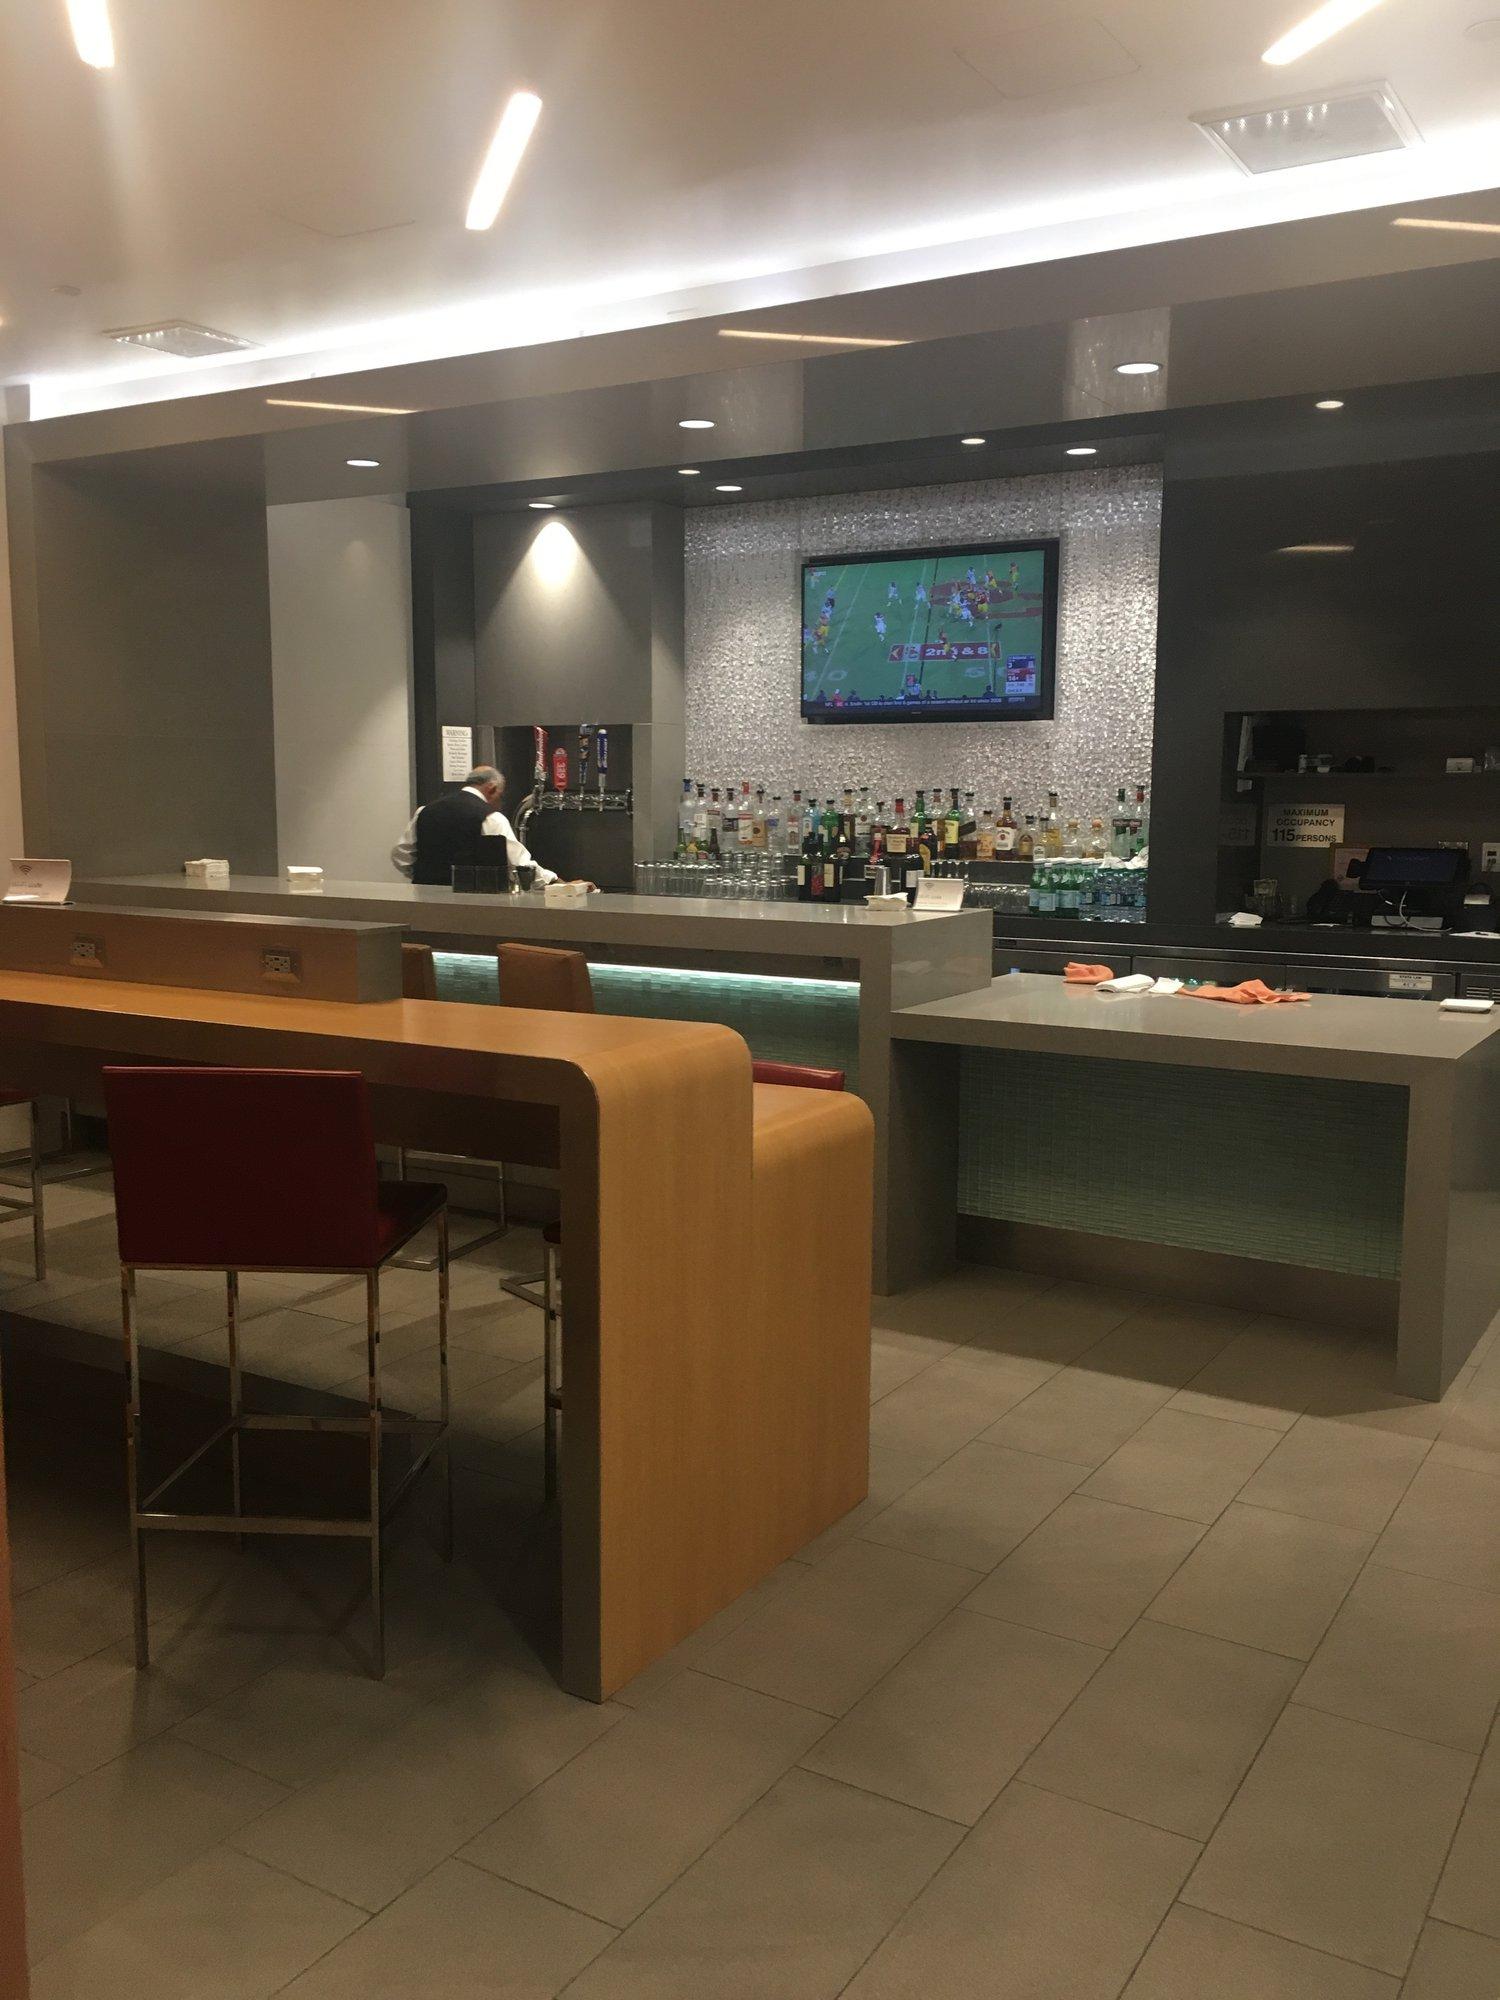 American Airlines Admirals Club image 14 of 43